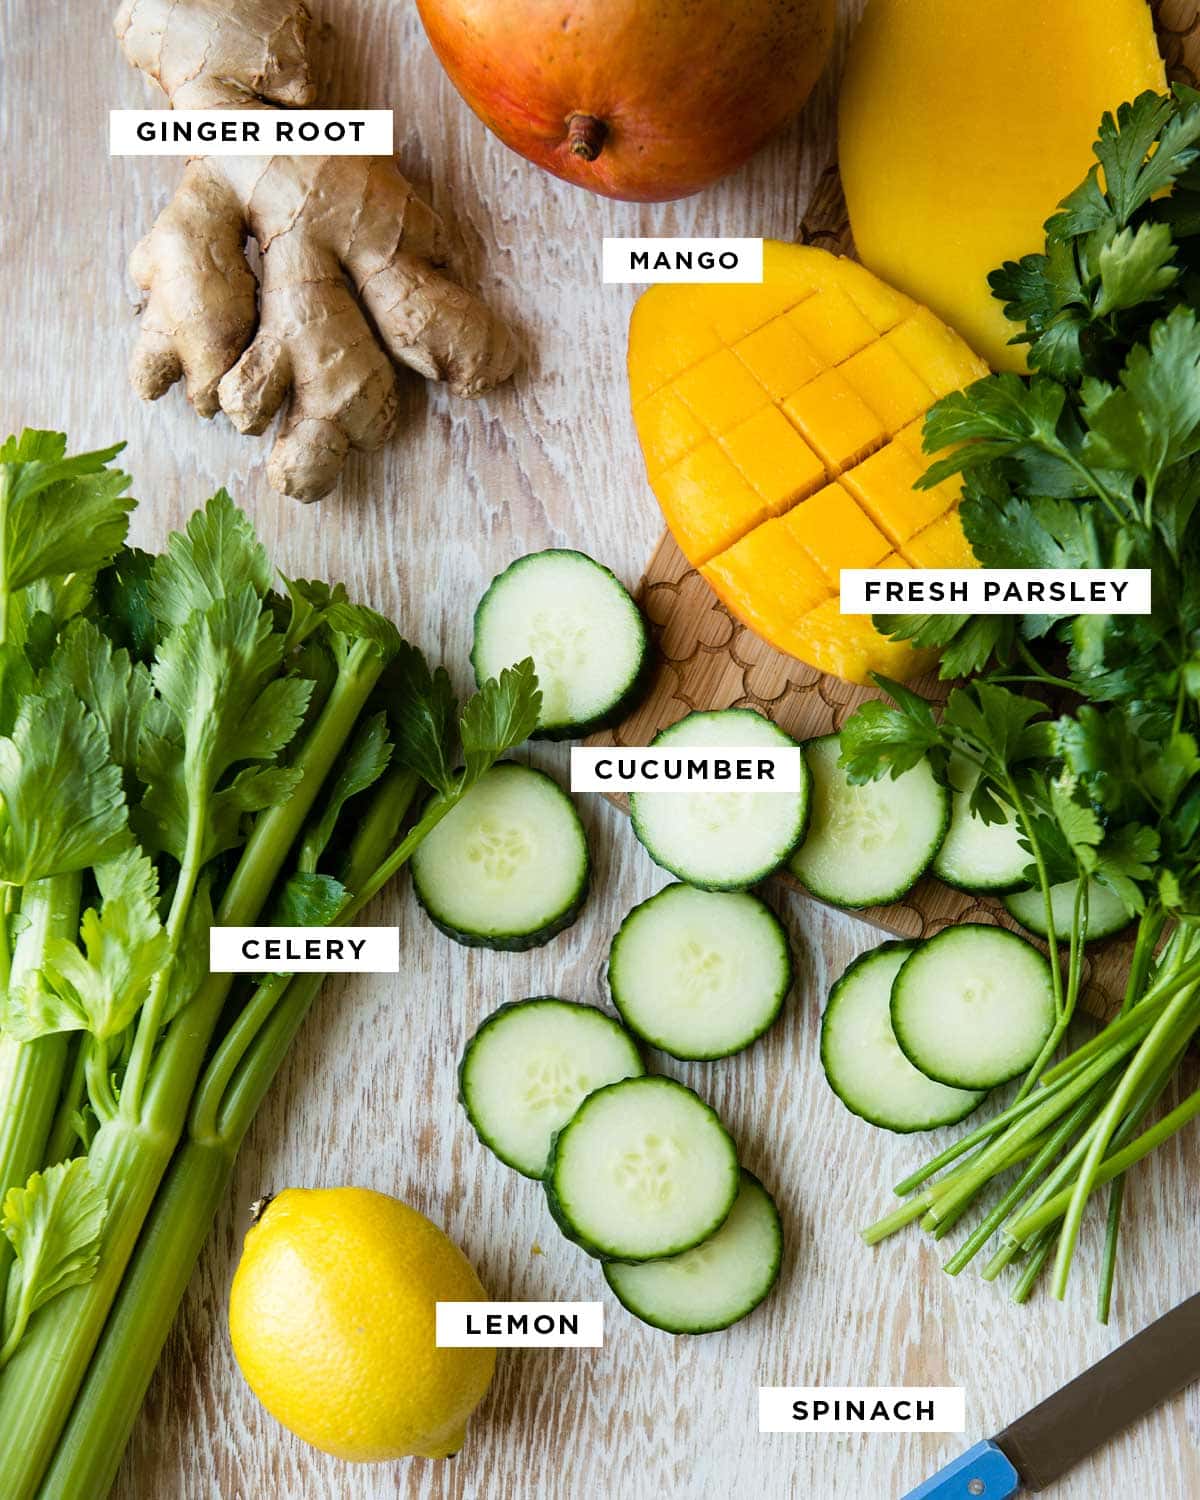 ingredients in a green smoothie including ginger root, mango, fresh parsley, cucumber, celery, lemon and spinach